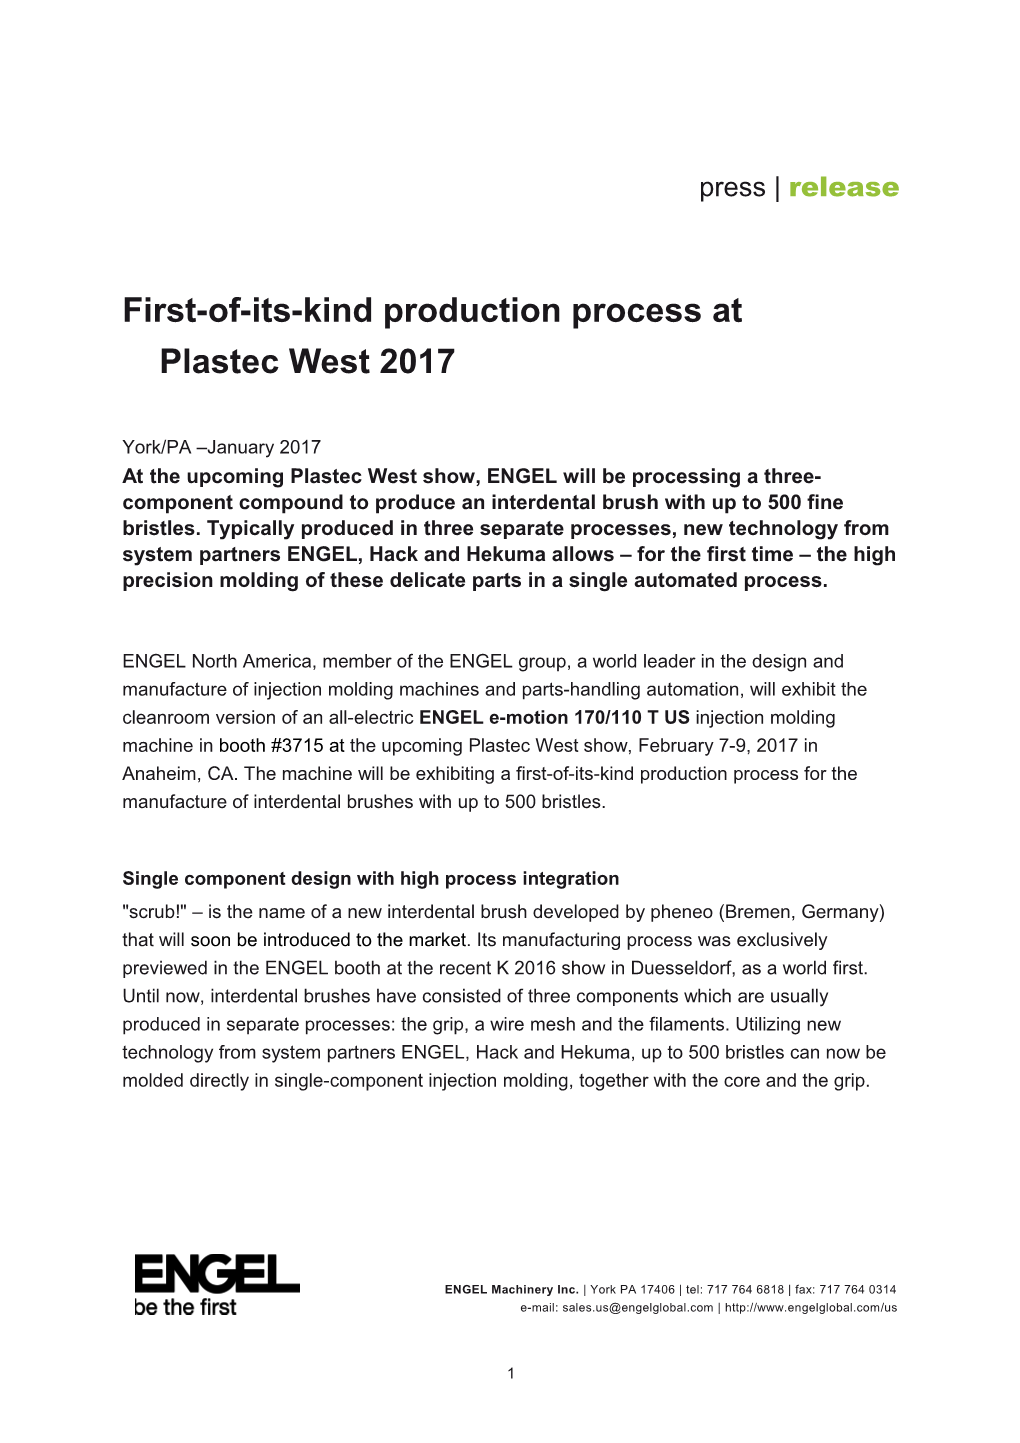 First-Of-Its-Kind Production Process at Plastec West2017